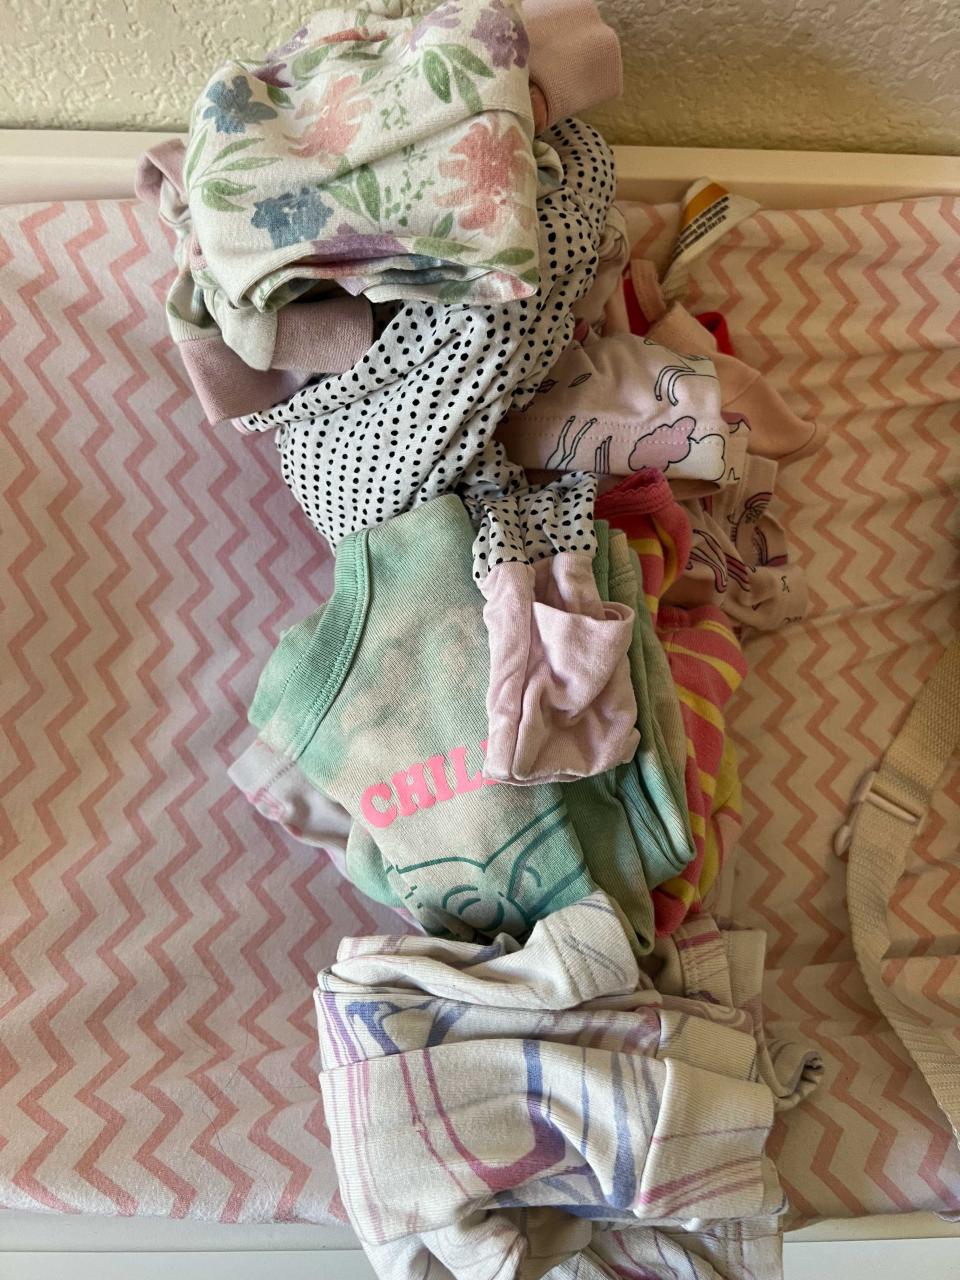 Three piles of children's clothes on a pink and white sheet.